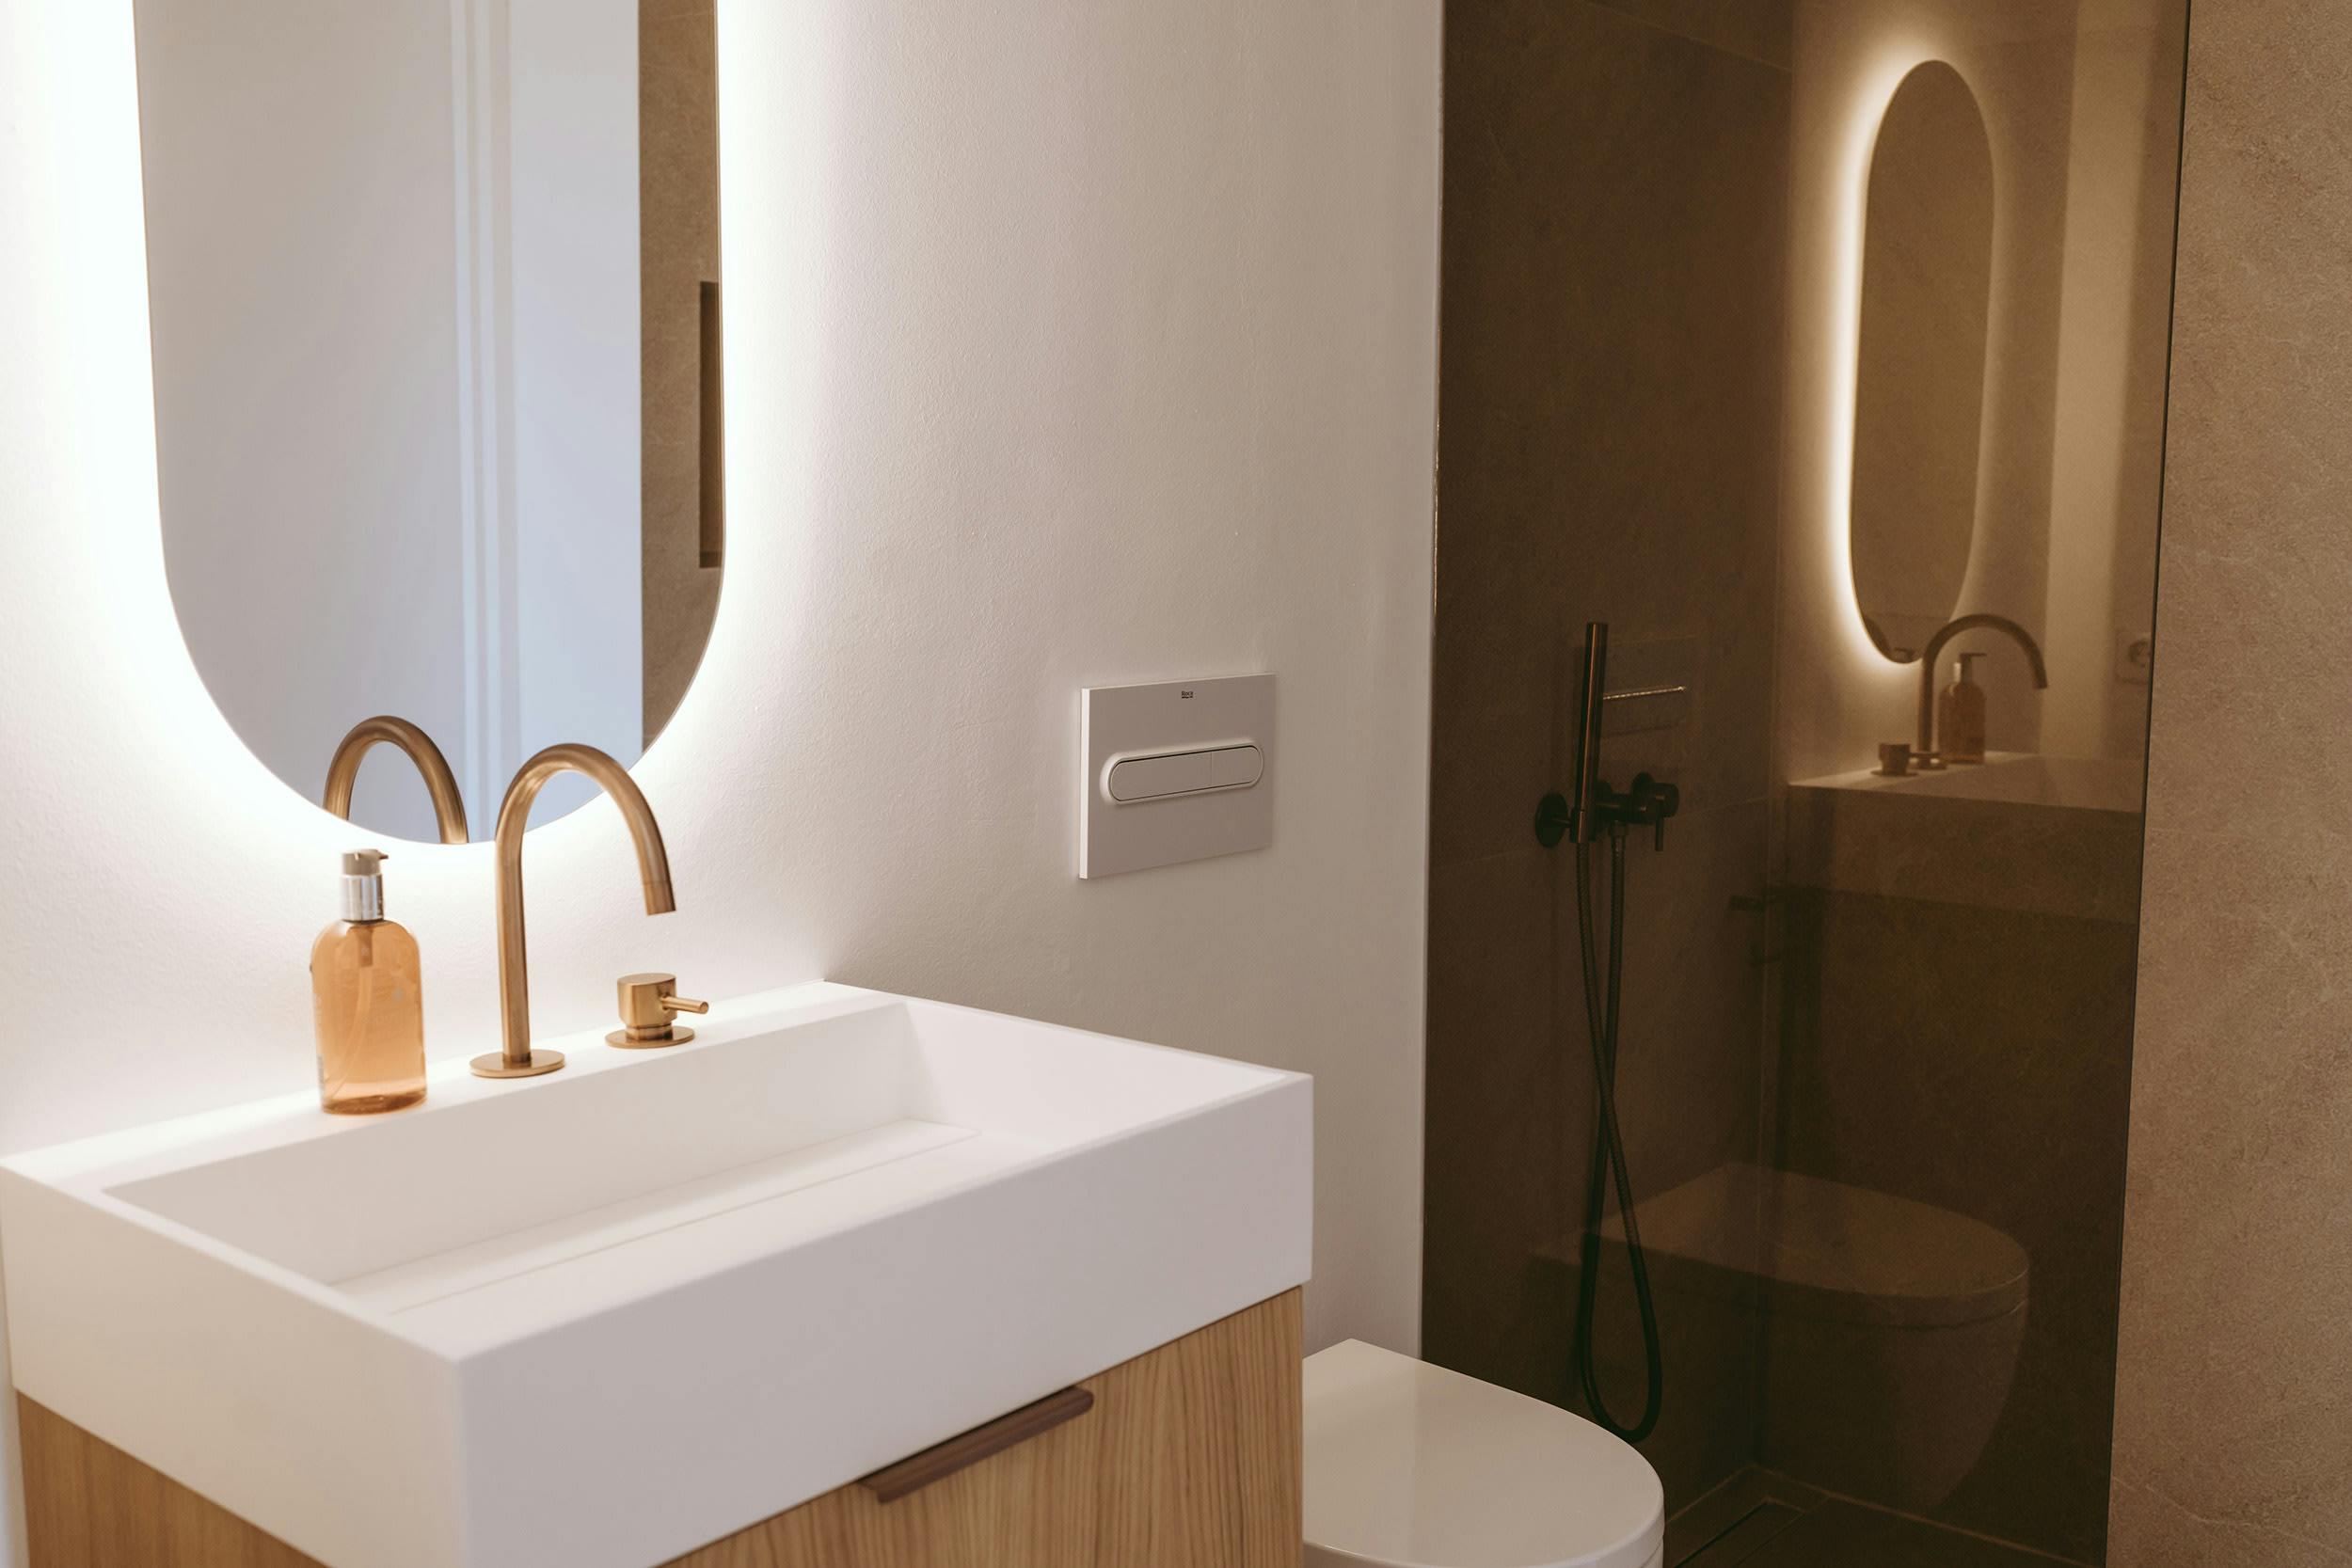 The image features a clean, modern bathroom with a white sink, a mirror, and a shower stall.